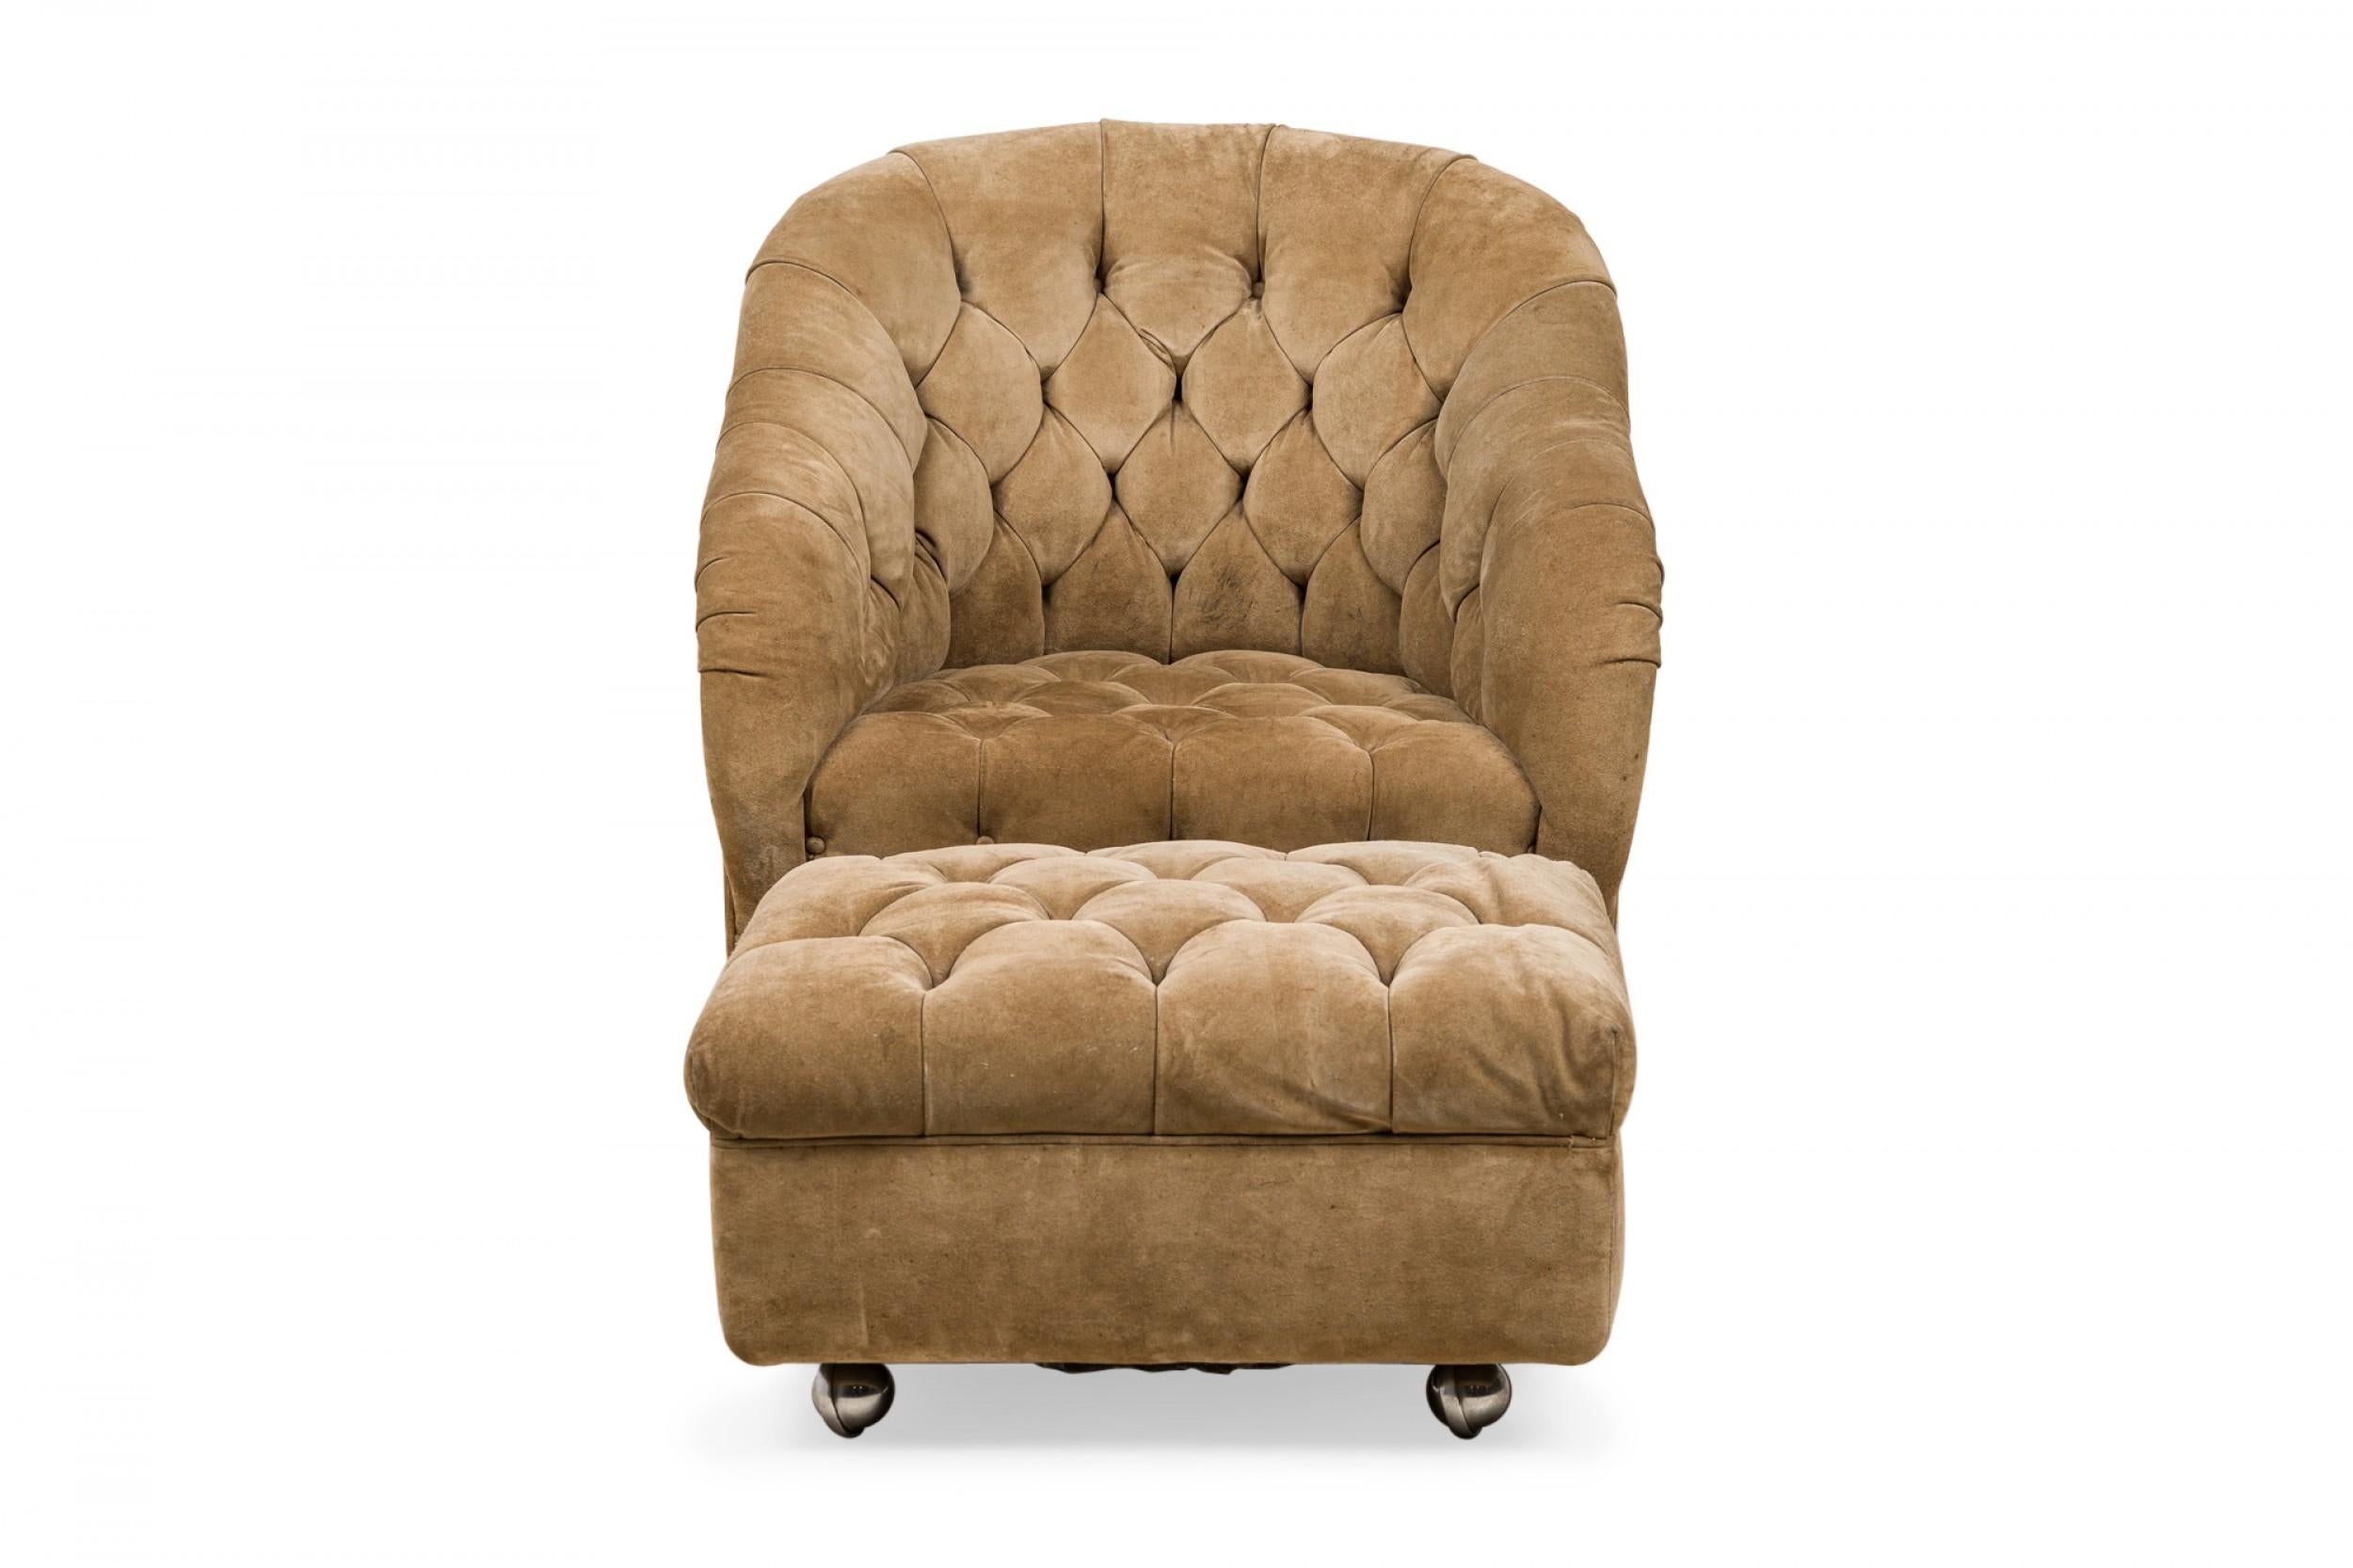 American Mid-Century tub-form lounge / armchair and matching ottoman set, upholstered in light brown button tufted velvet upholstery. (WARD BENNETT)(PRICED AS SET)
